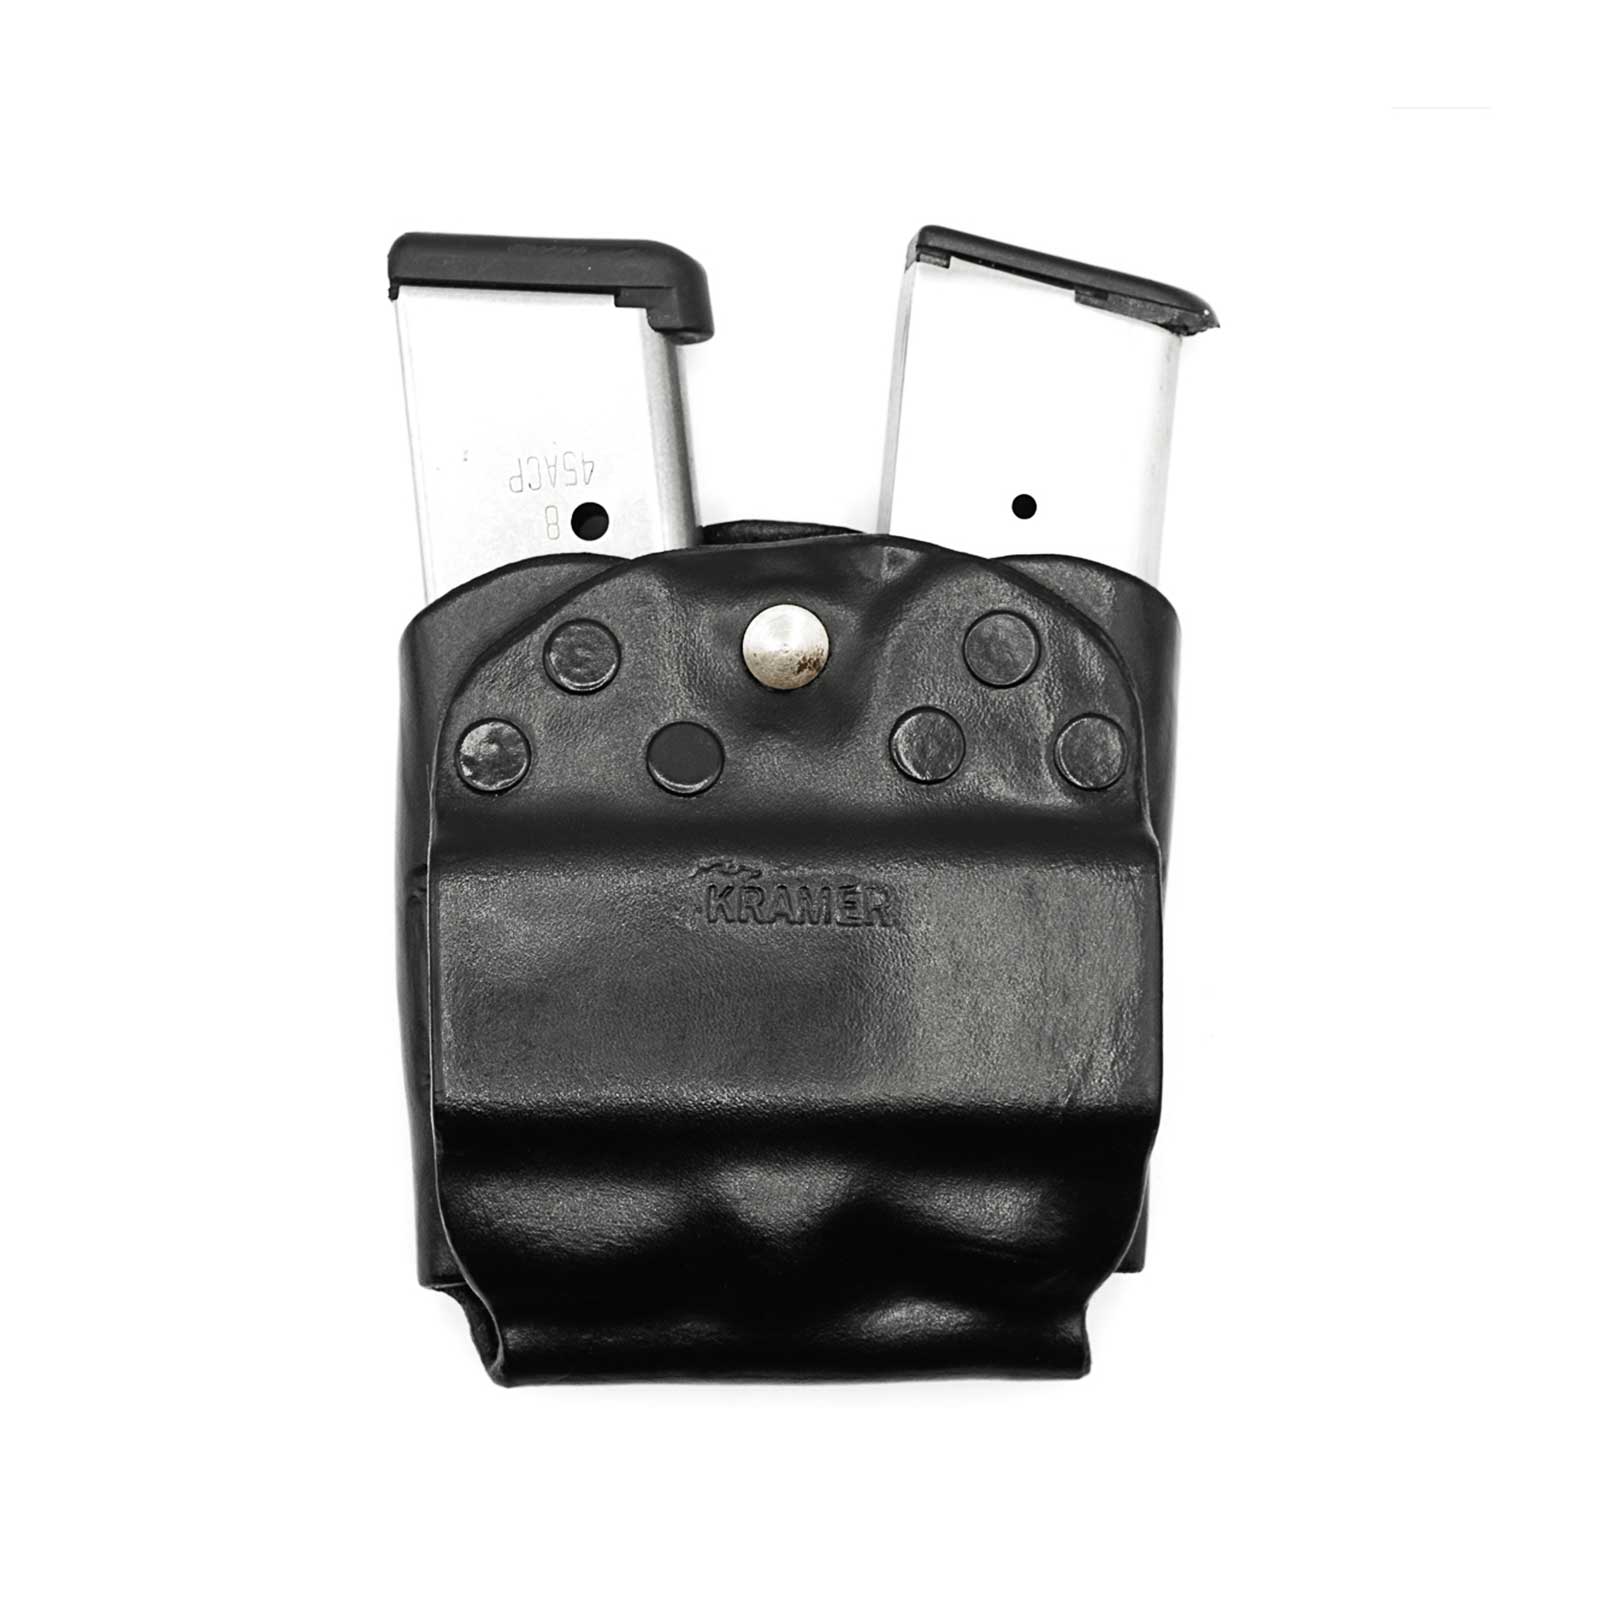 MAG 2.1 - Double Mag Carrier Single Stack Mags - 1791 Gunleather